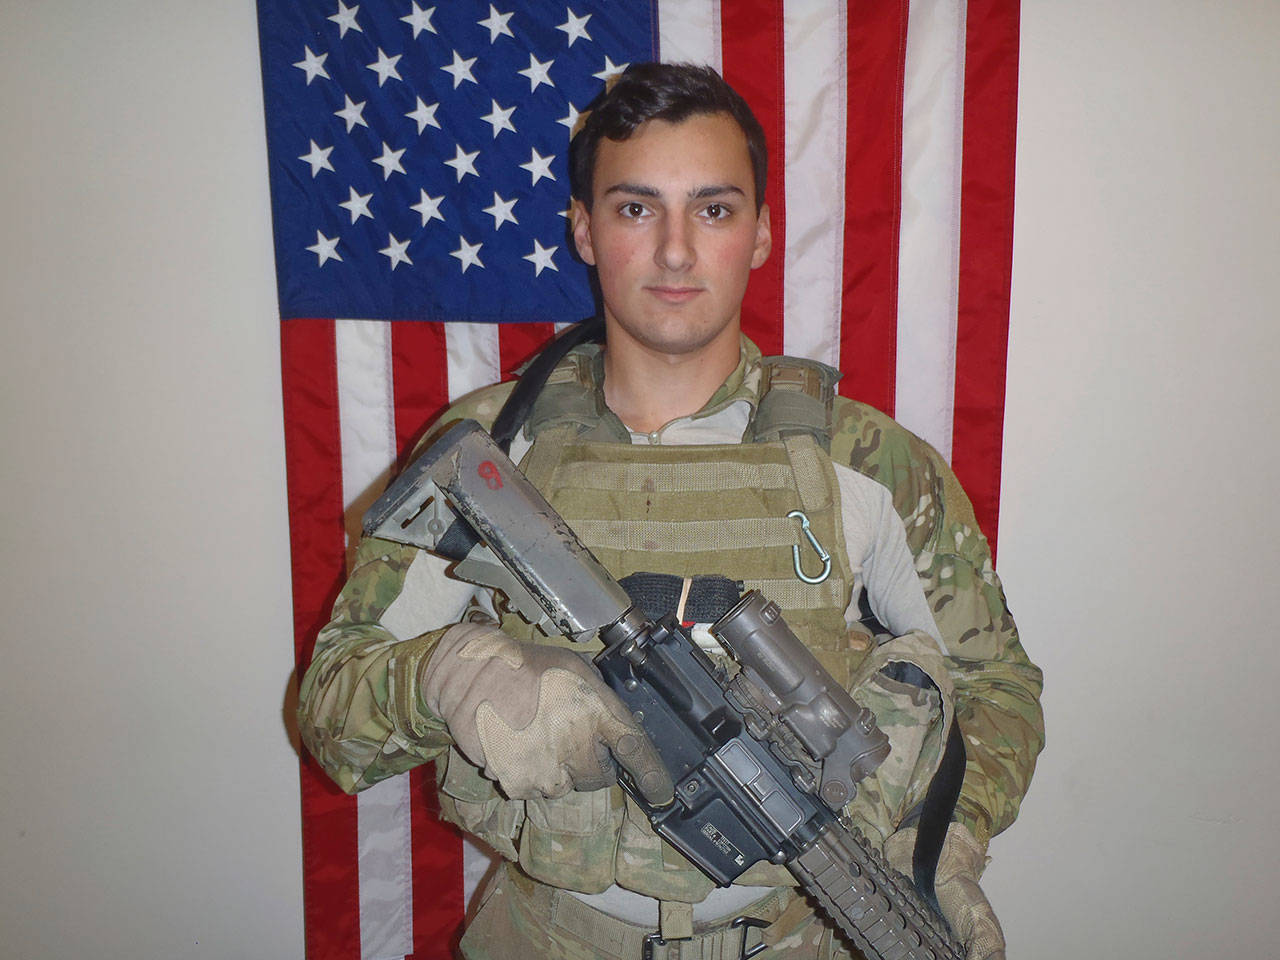 This undated photo released by the U.S. Special Operations Command/Department of Defense shows Sgt. Leandro Jasso, 25, who was assigned to Company A, 2nd Battalion, 75th Ranger Regiment, Joint Base Lewis-McChord. (U.S. Special Operations Command/Department of Defense via AP)